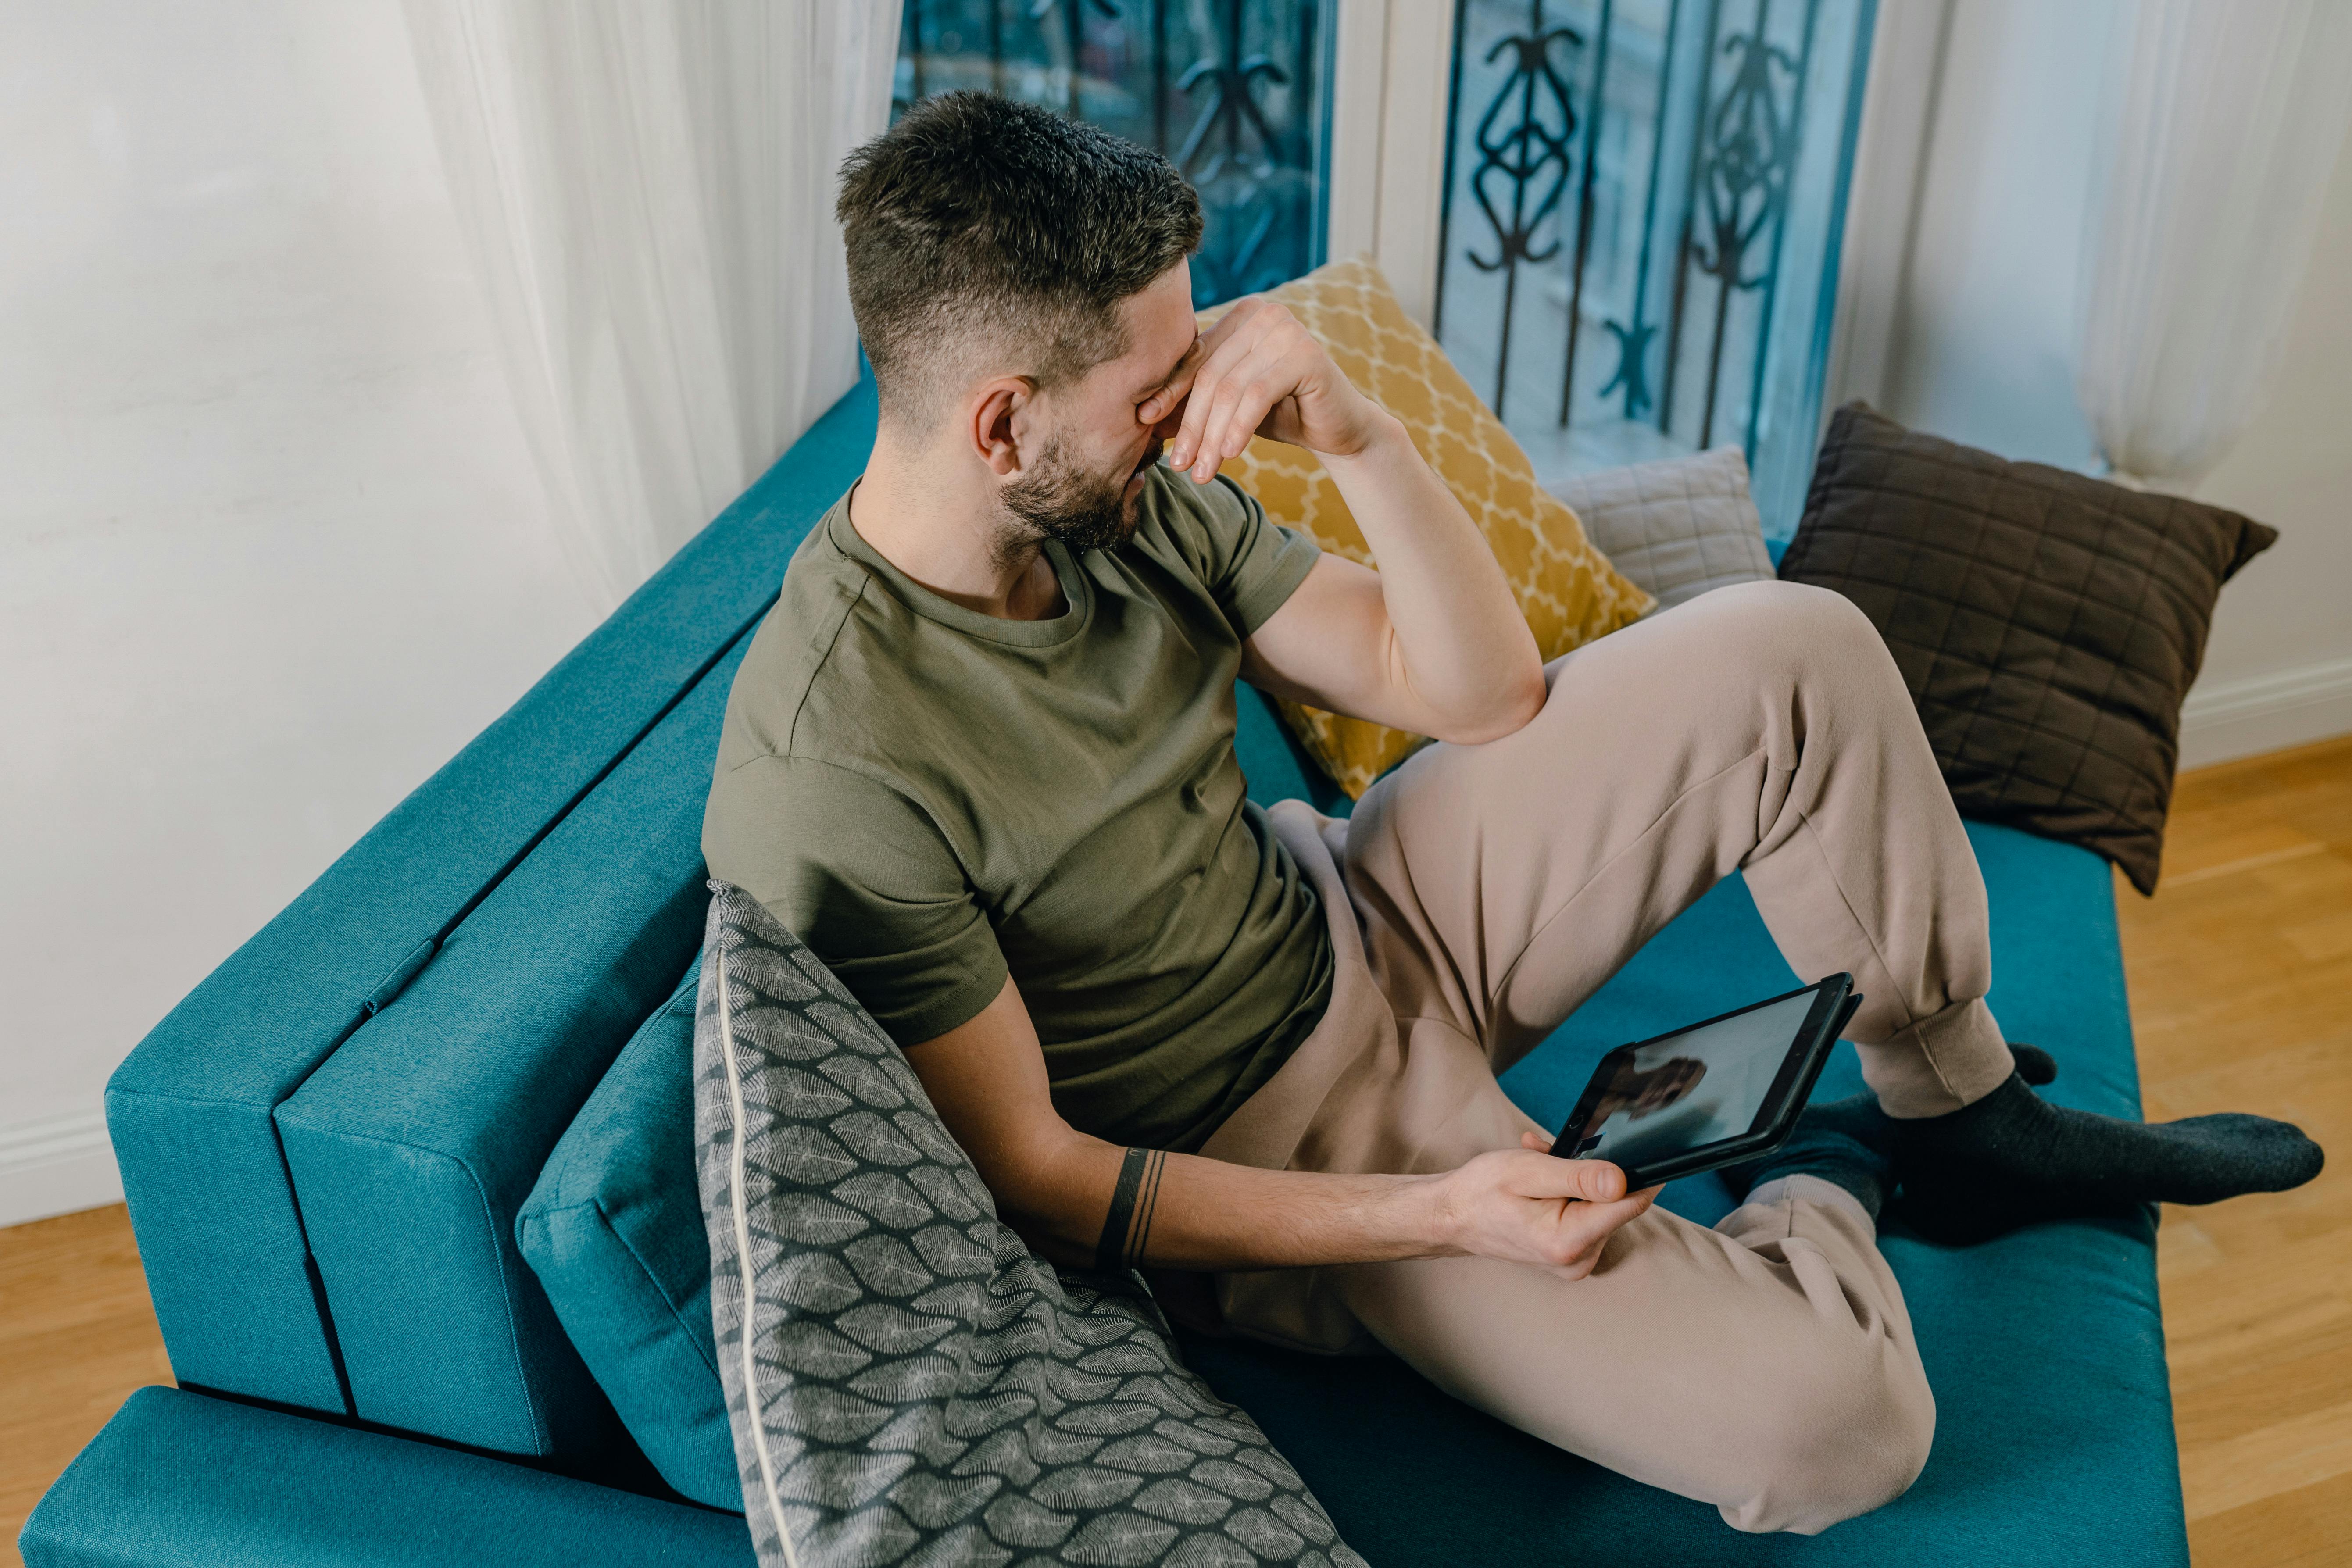 A man sitting on the couch crying | Source: Pexels